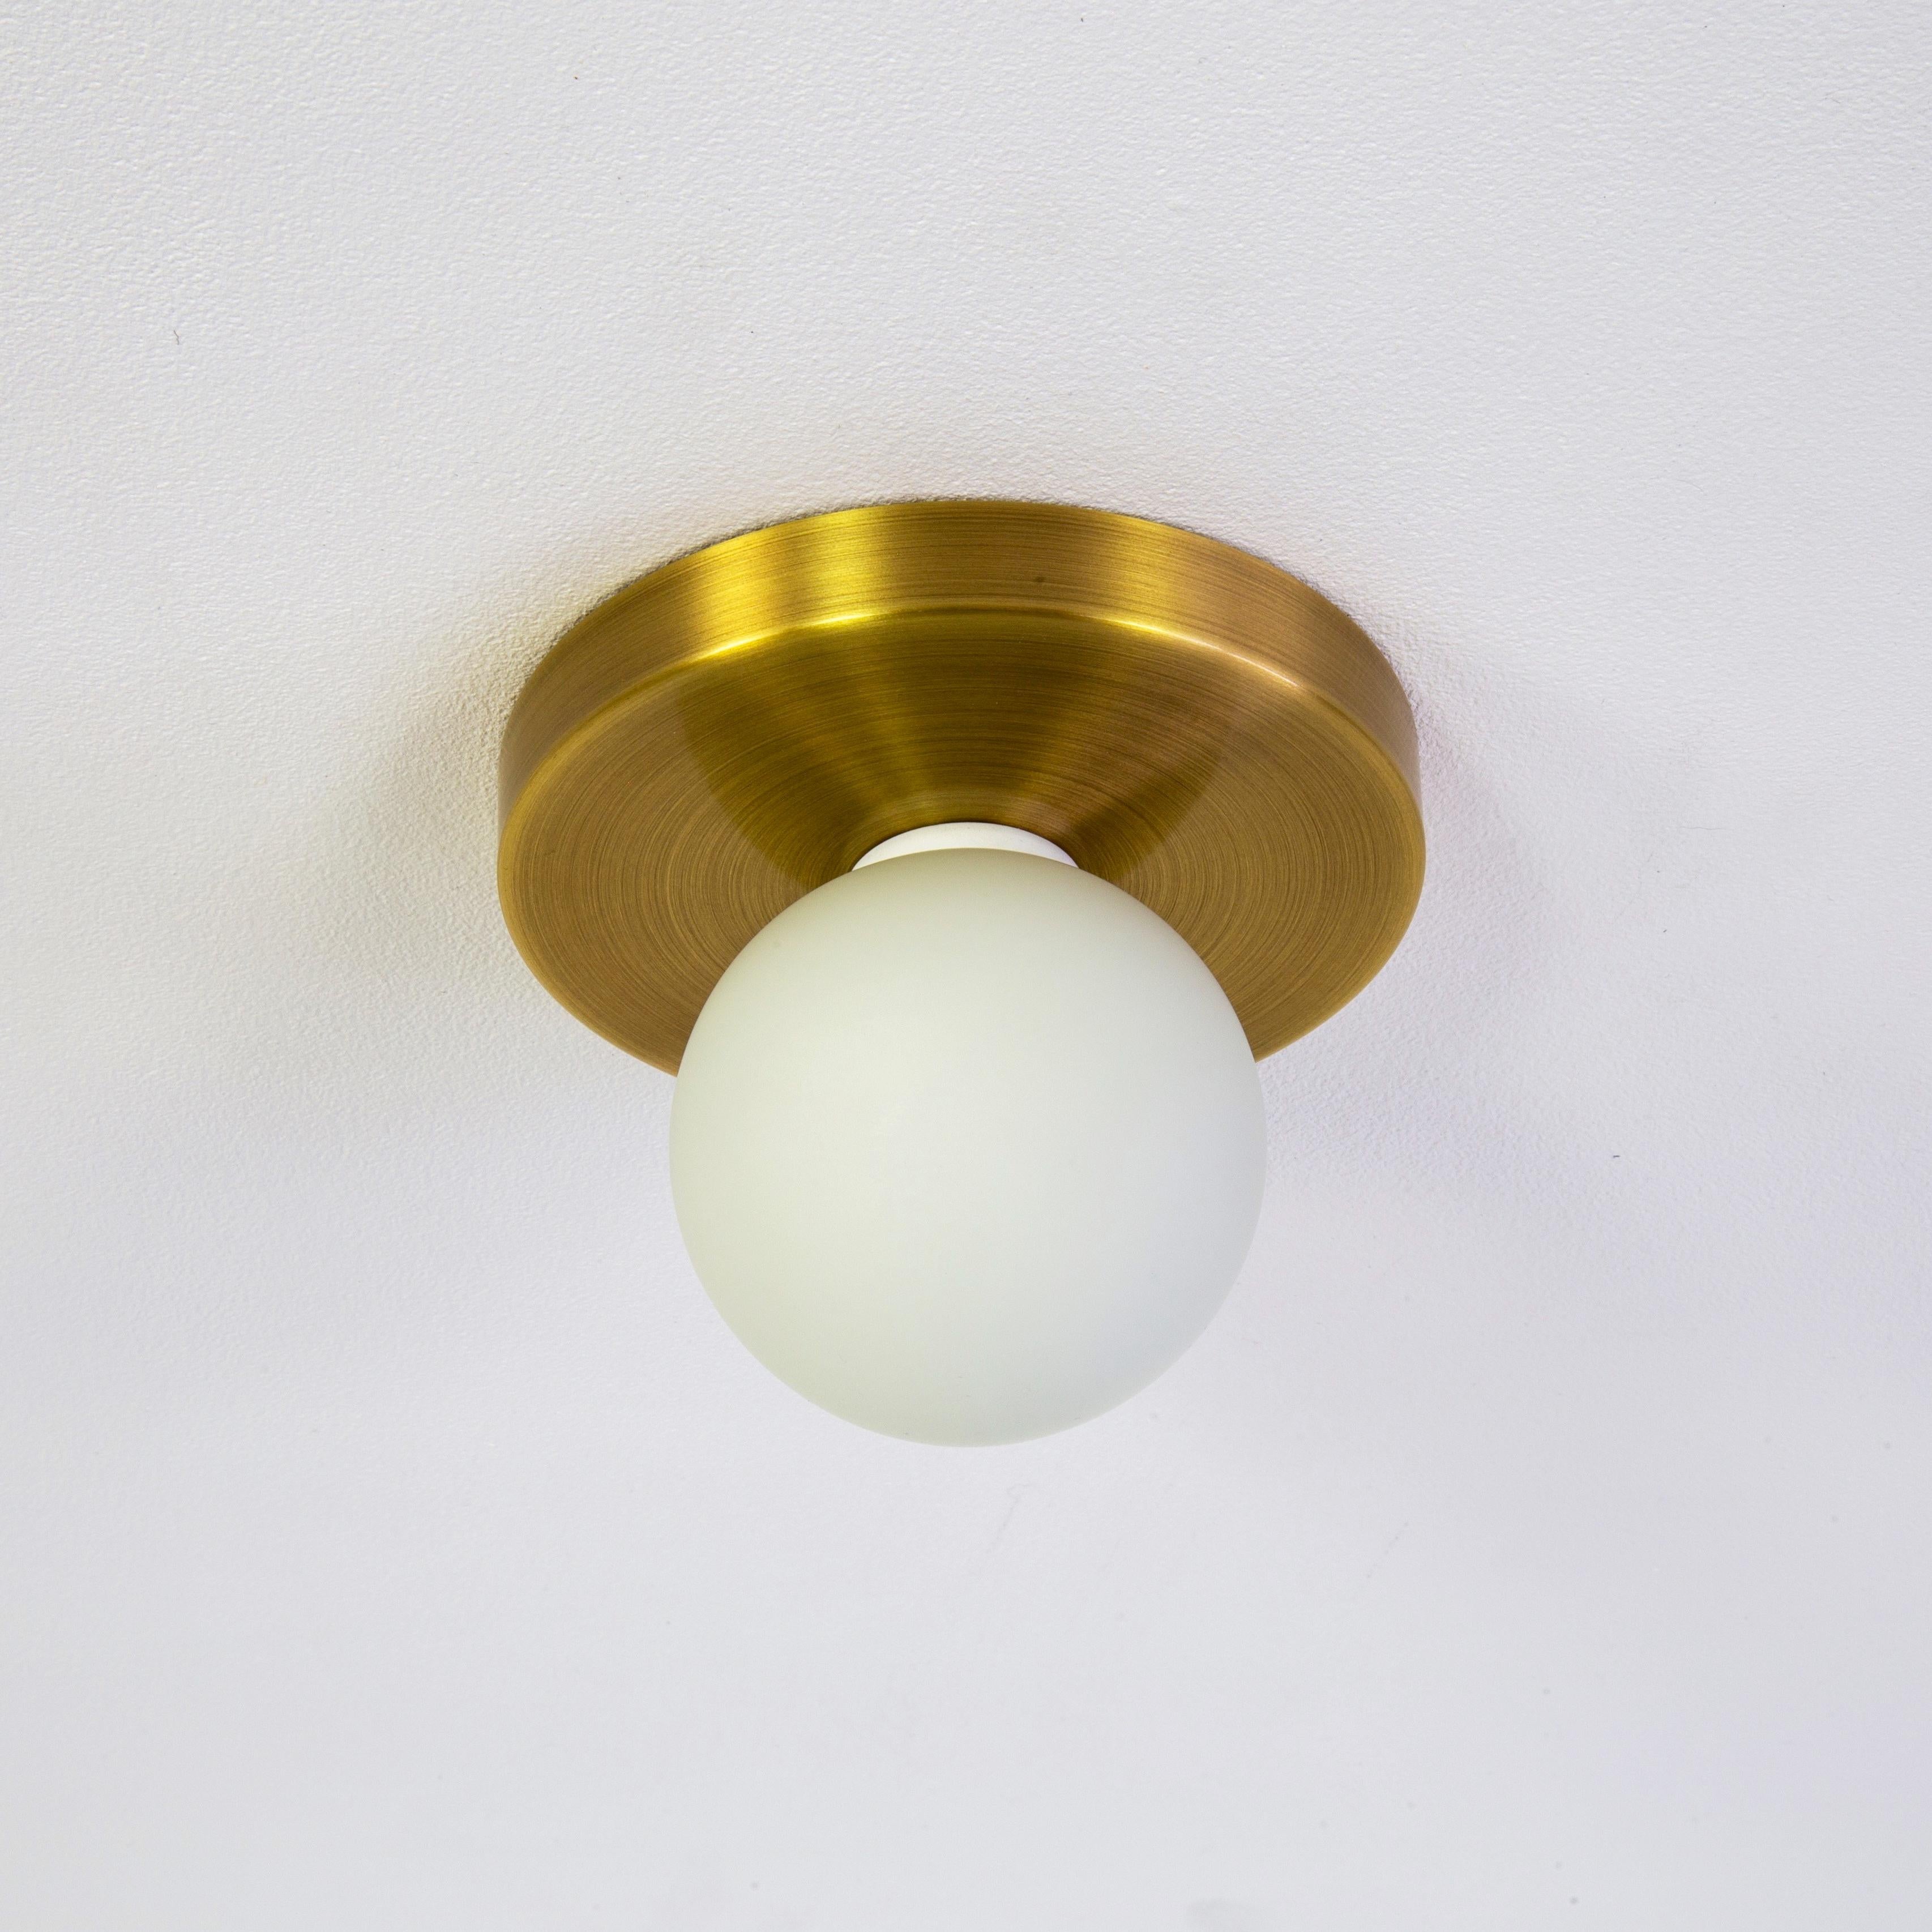 This listing is for 4x Globe Flush Mounts in brushed brass designed and manufactured by Research.Lighting.

Materials: Brass, Steel & Glass
Finish: Brushed Brass
Electronics: 1x G9 Socket, 1x 4.5 Watt LED Bulb (included), 450 Lumens
ADA Compliant.